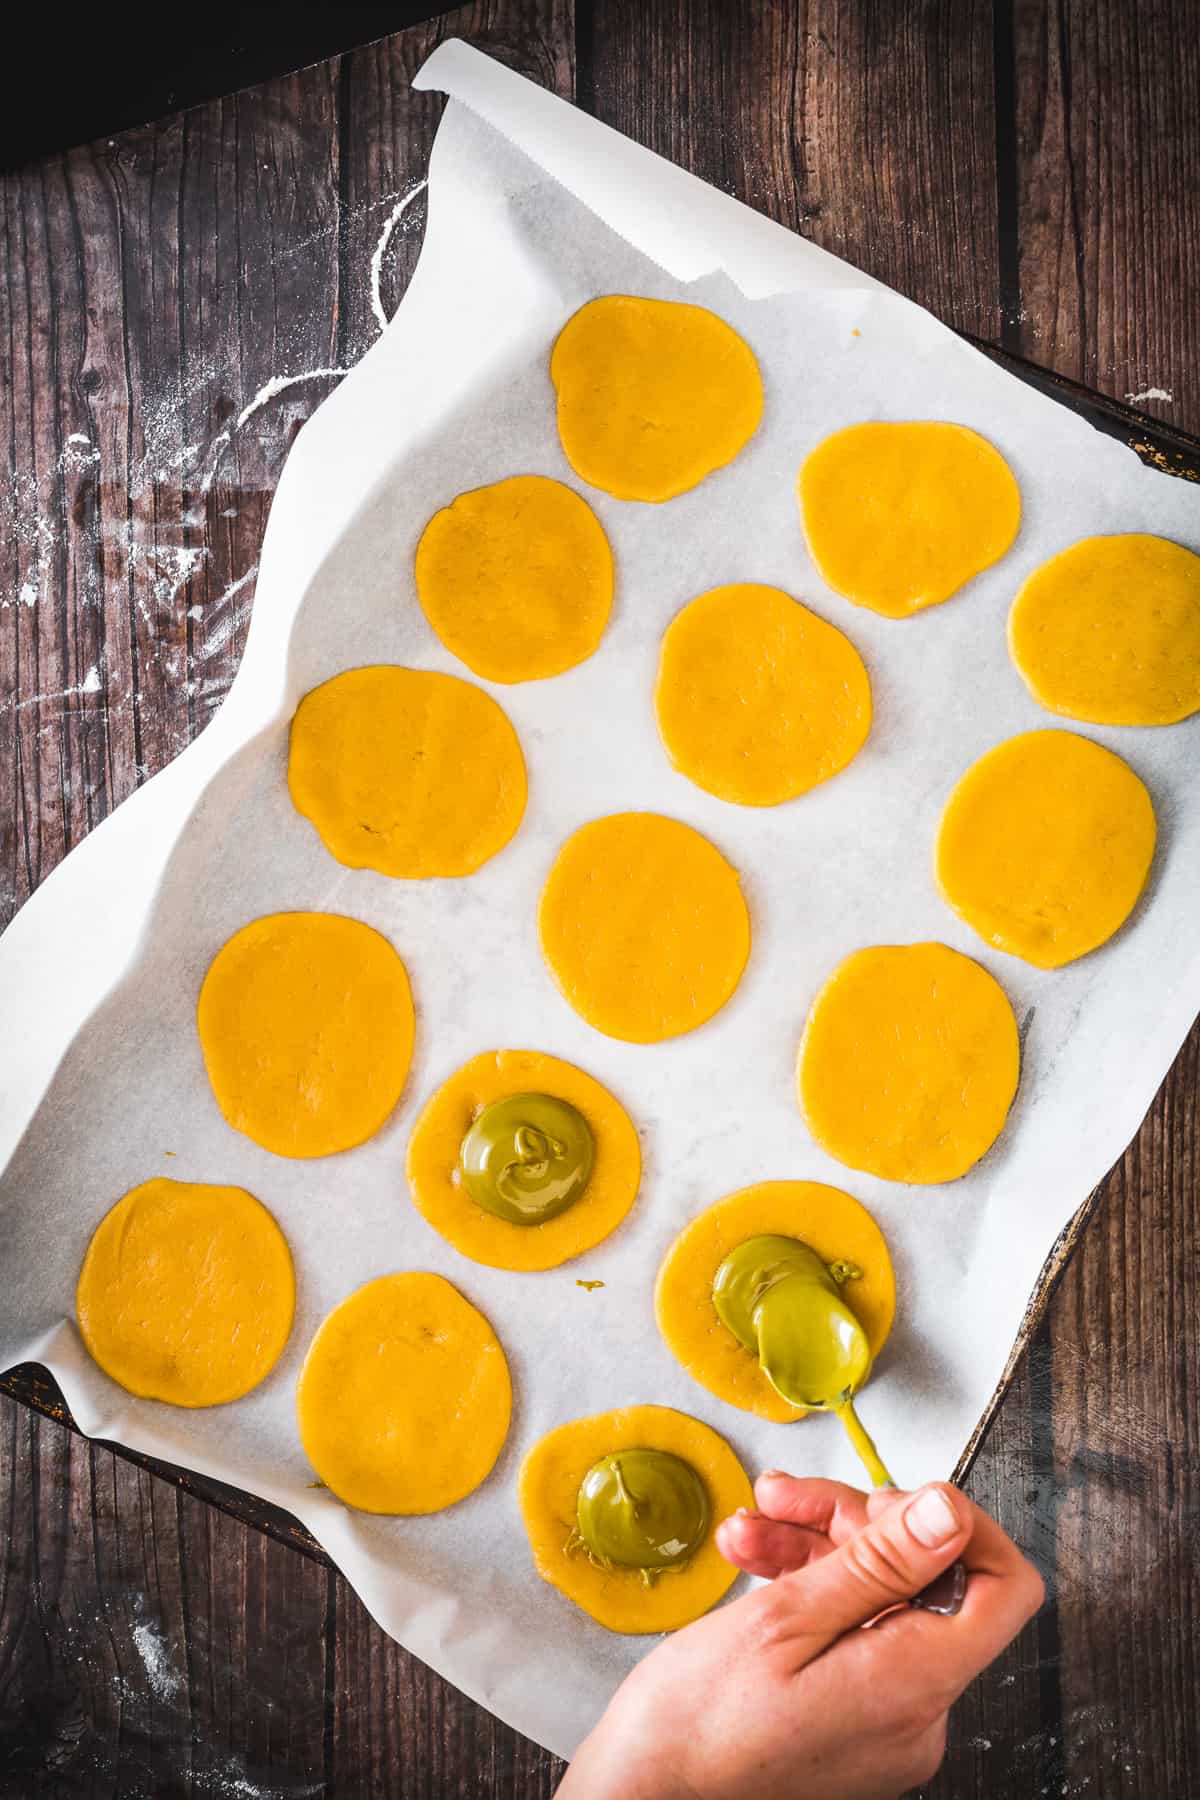 A person pipetting pistachio liquid onto circular orange dough laid out on baking paper.